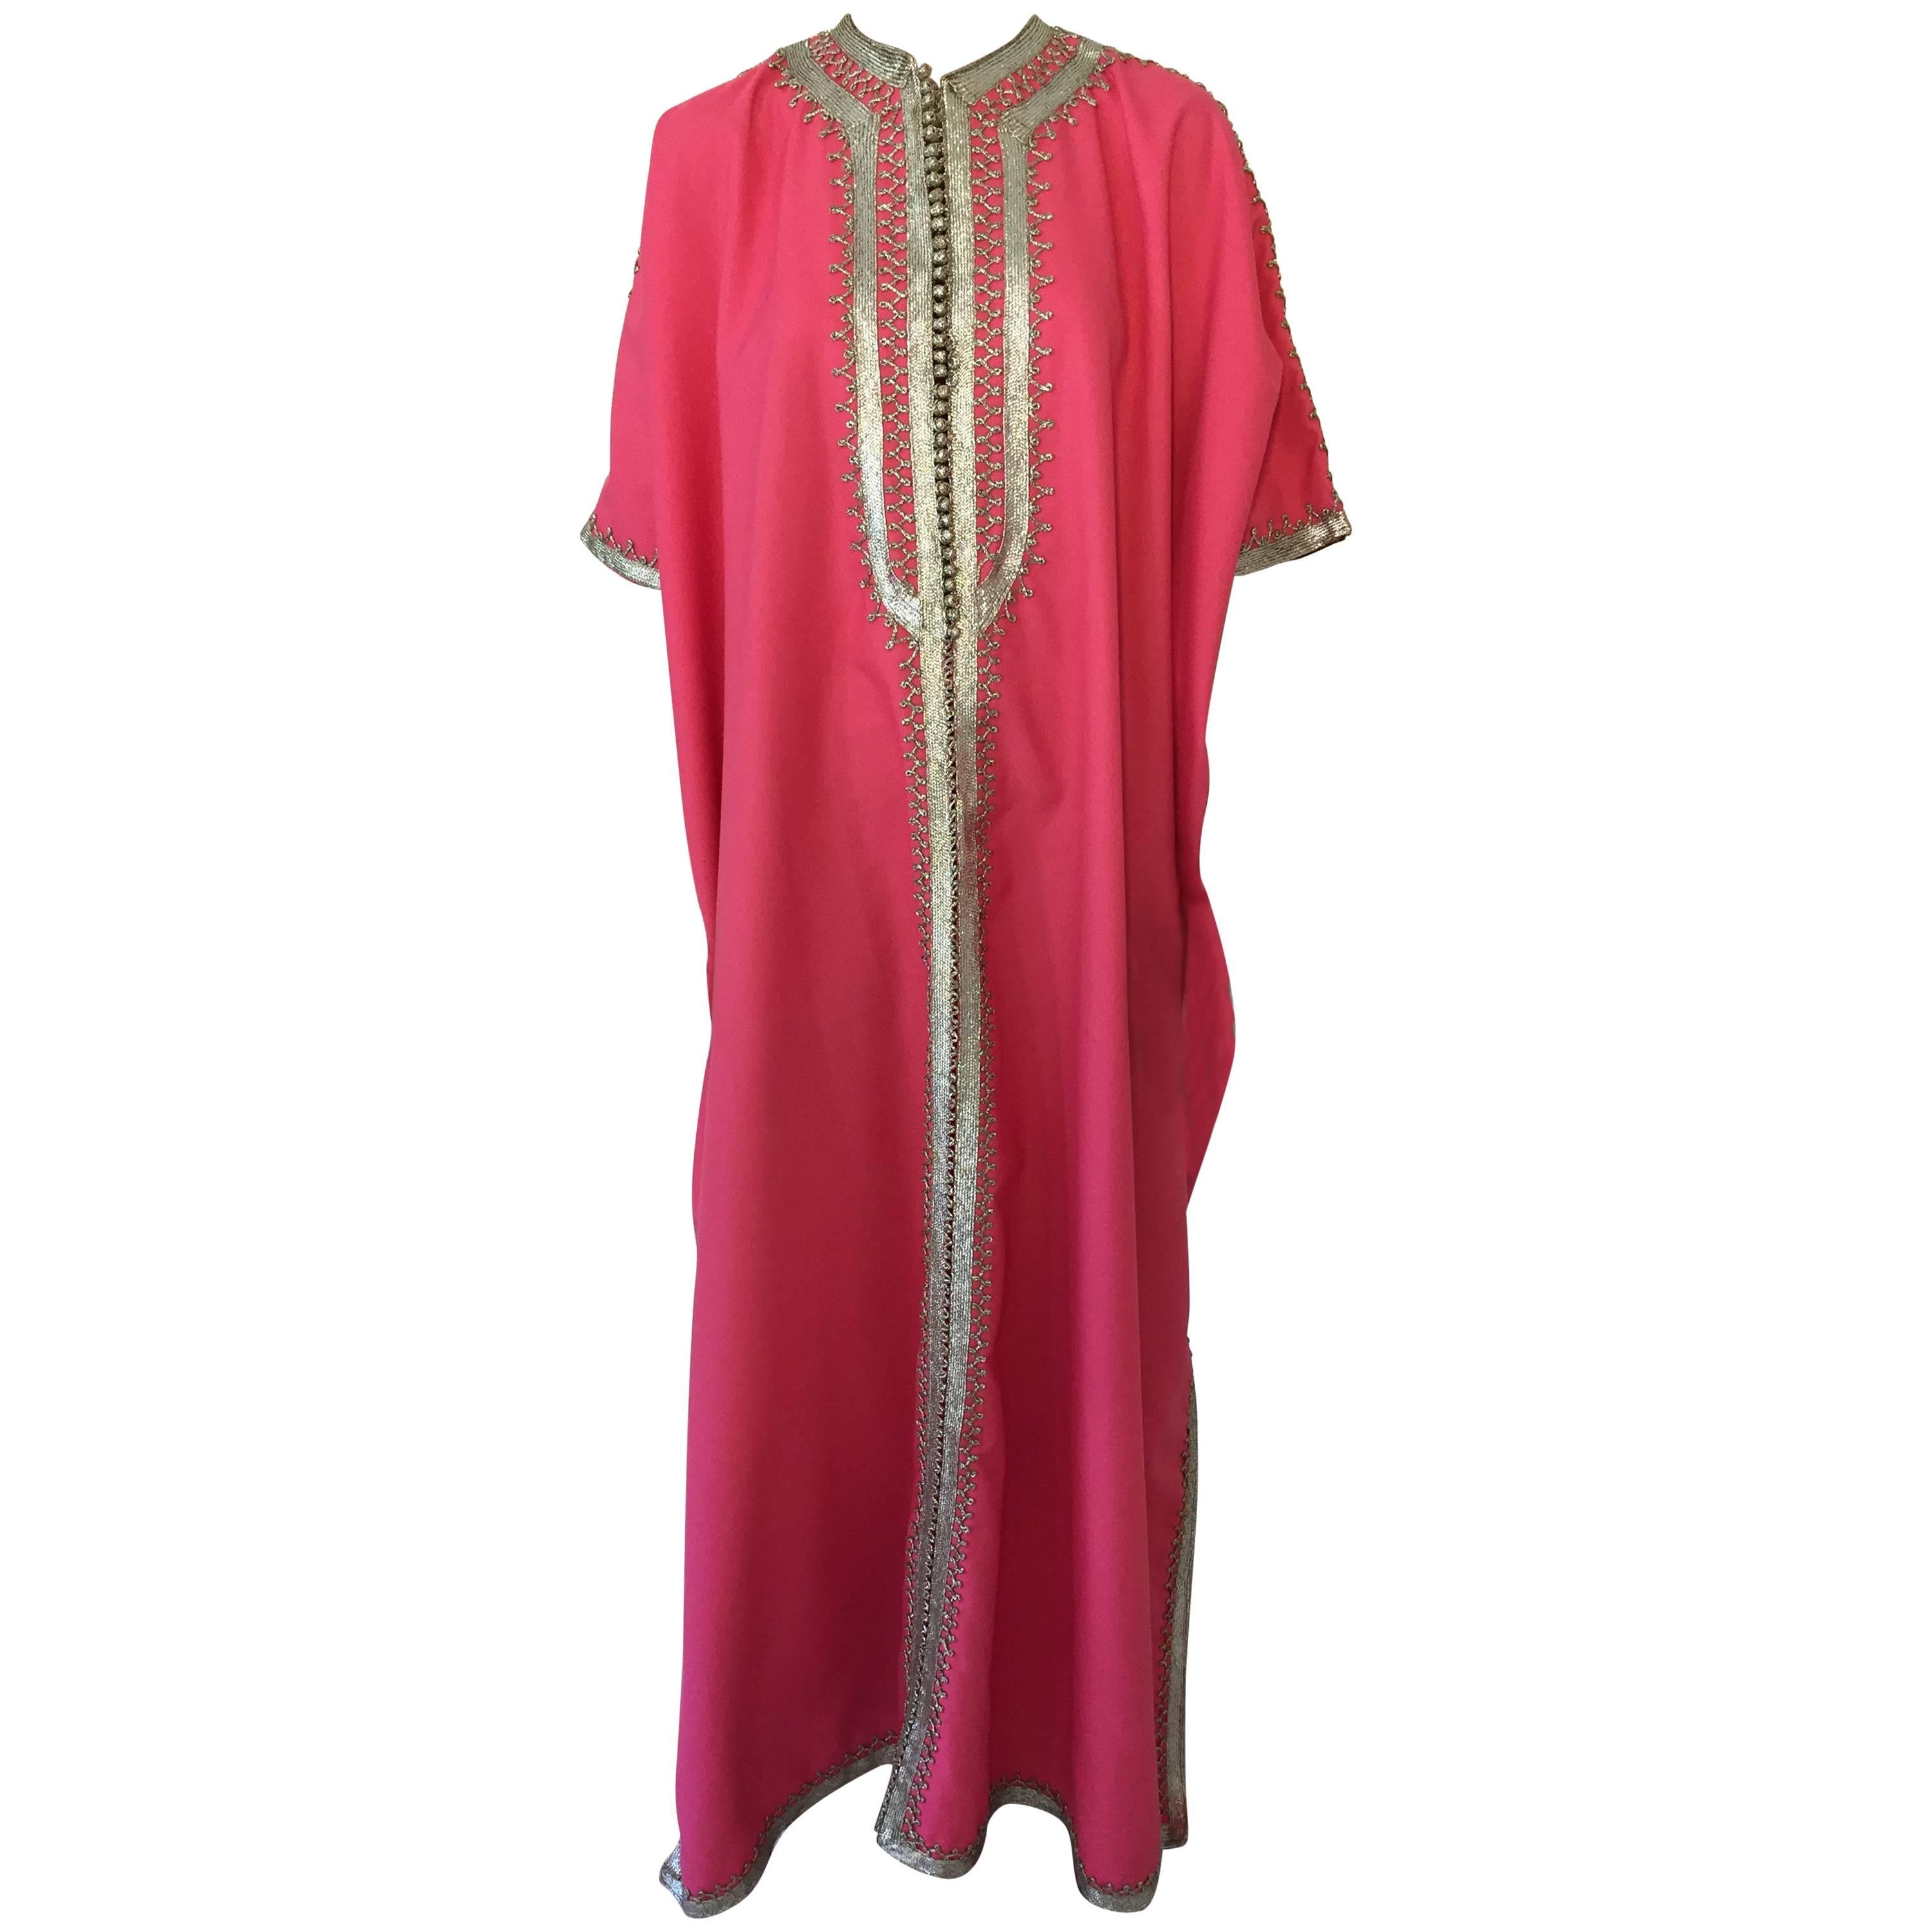 Moroccan Caftan Hot Pink Color Embroidered with Silver, Kaftan circa 1970 For Sale